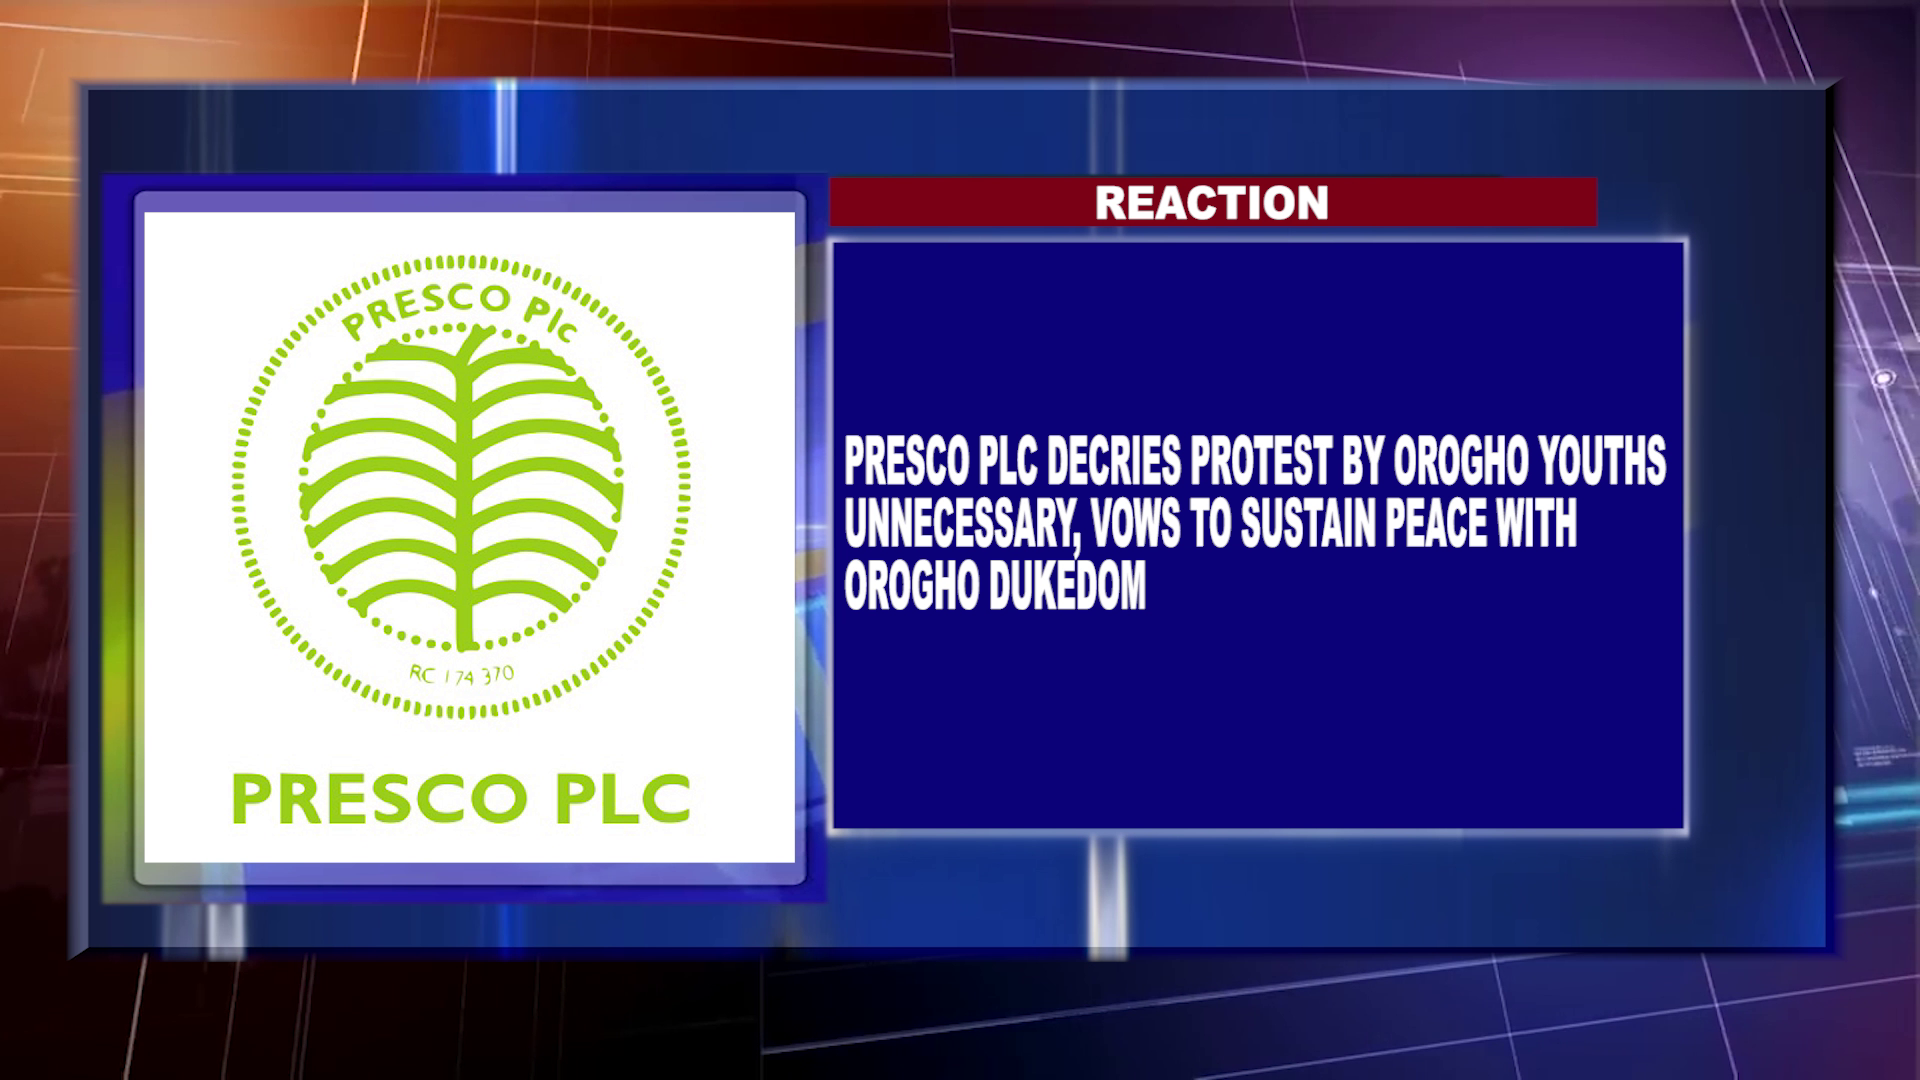 Presco PLC Decries Protest By Orogho Youths Unnecessary, Vows To Sustain Peace With Orogho Dukedom